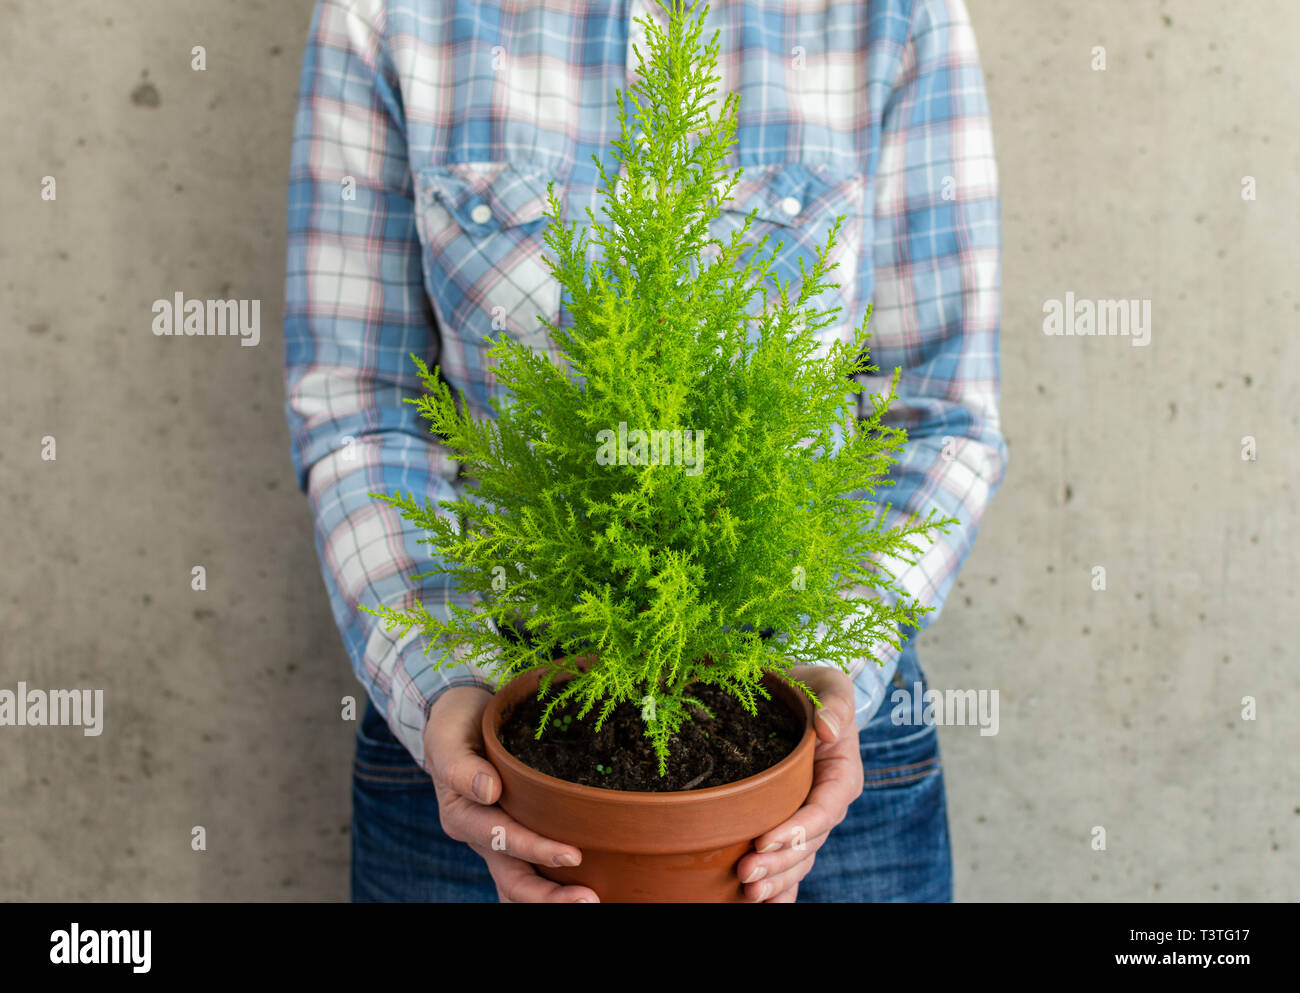 Woman holding a houseplant Cupressus Goldcrest Wilma in her hands against the background of a concrete wall Stock Photo